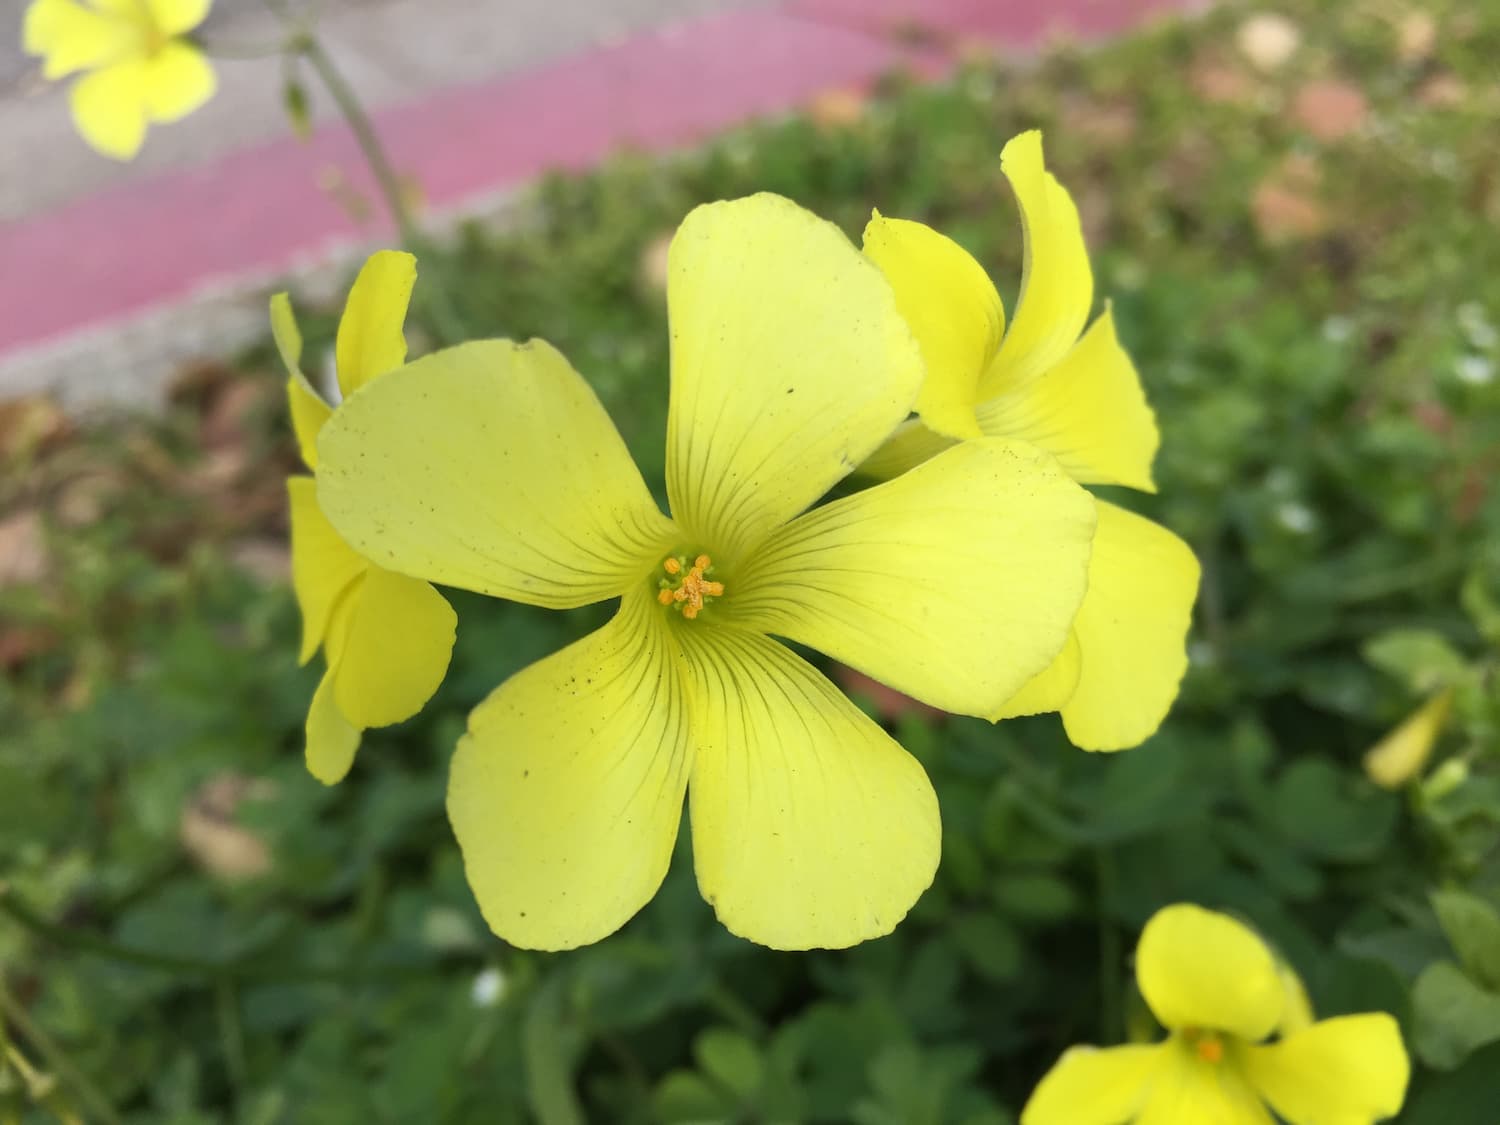 Wood sorrel flowers are typically yellow or white. These sour grass flowers are particular large and vivid.